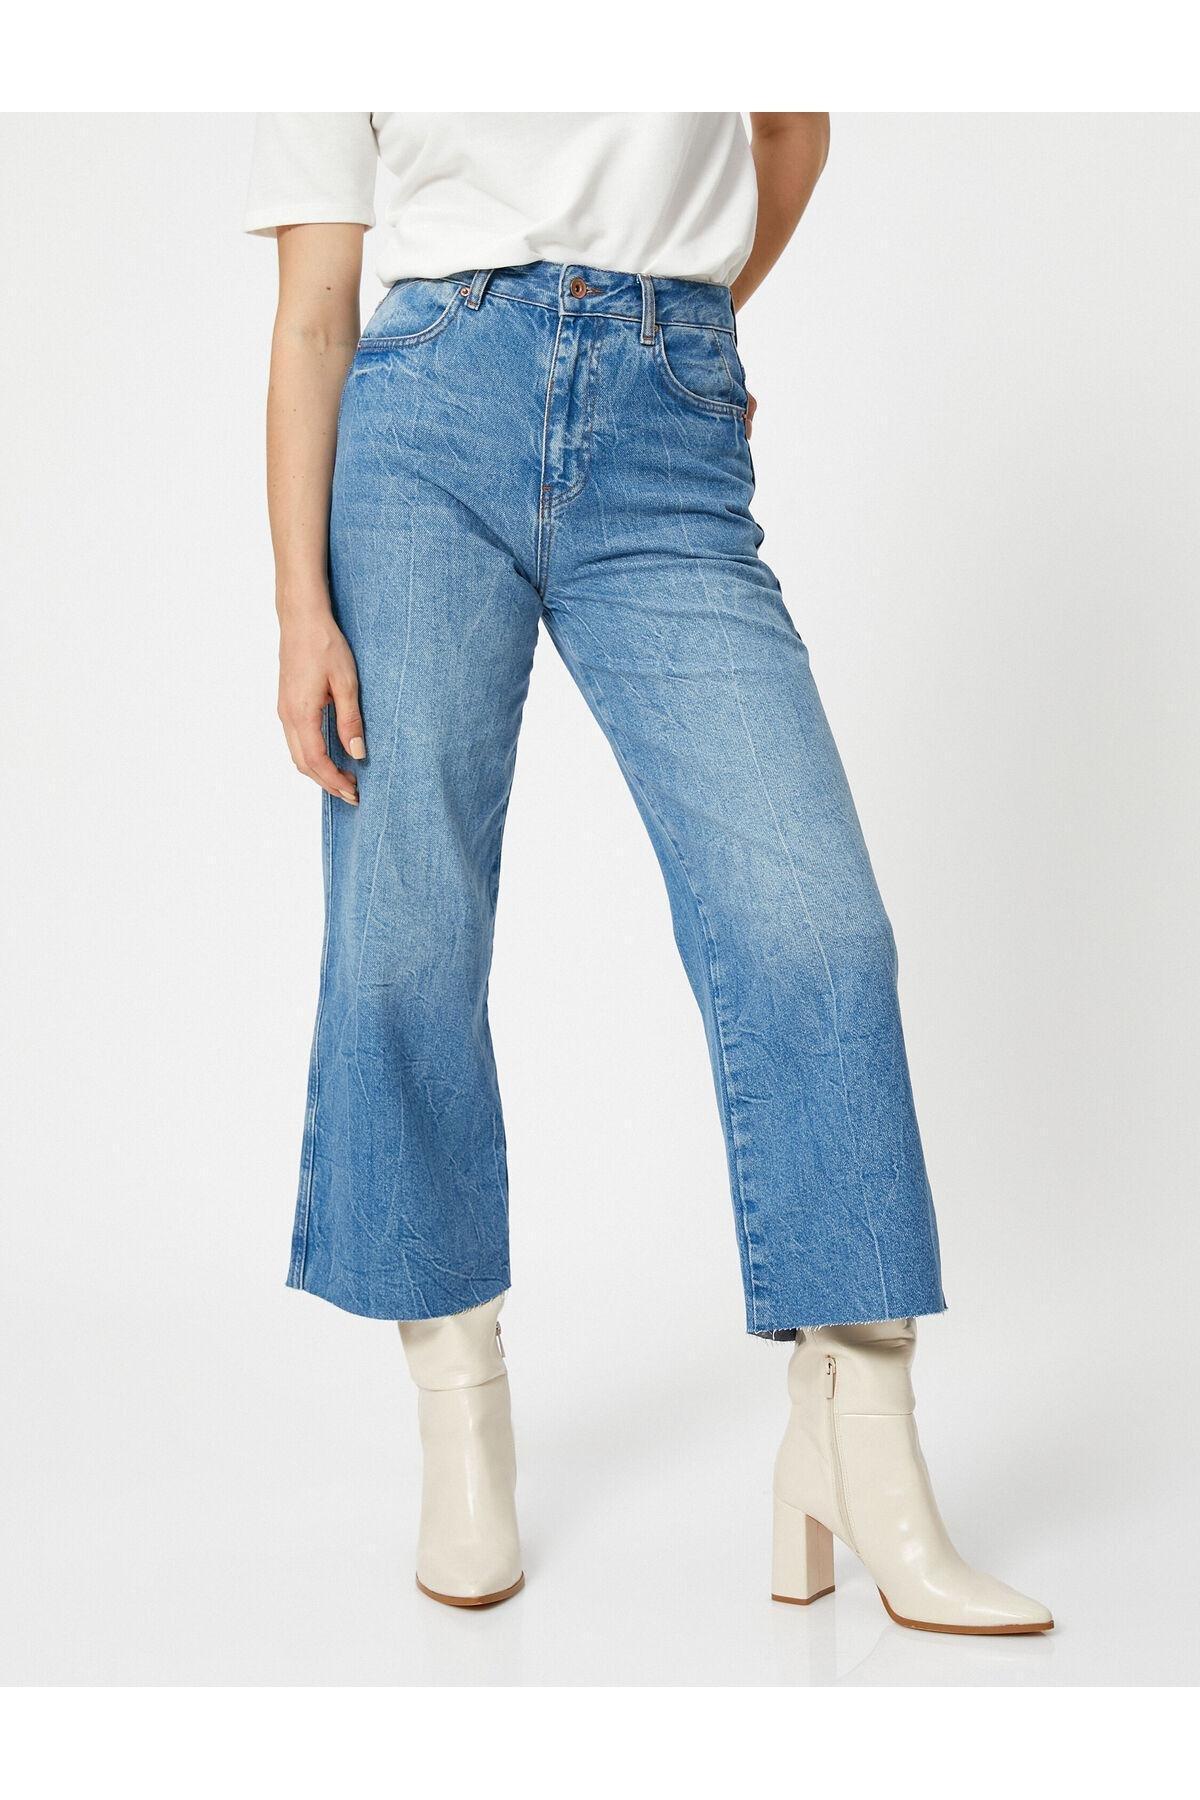 Koton - Blue Extra Wide Crop Jeans